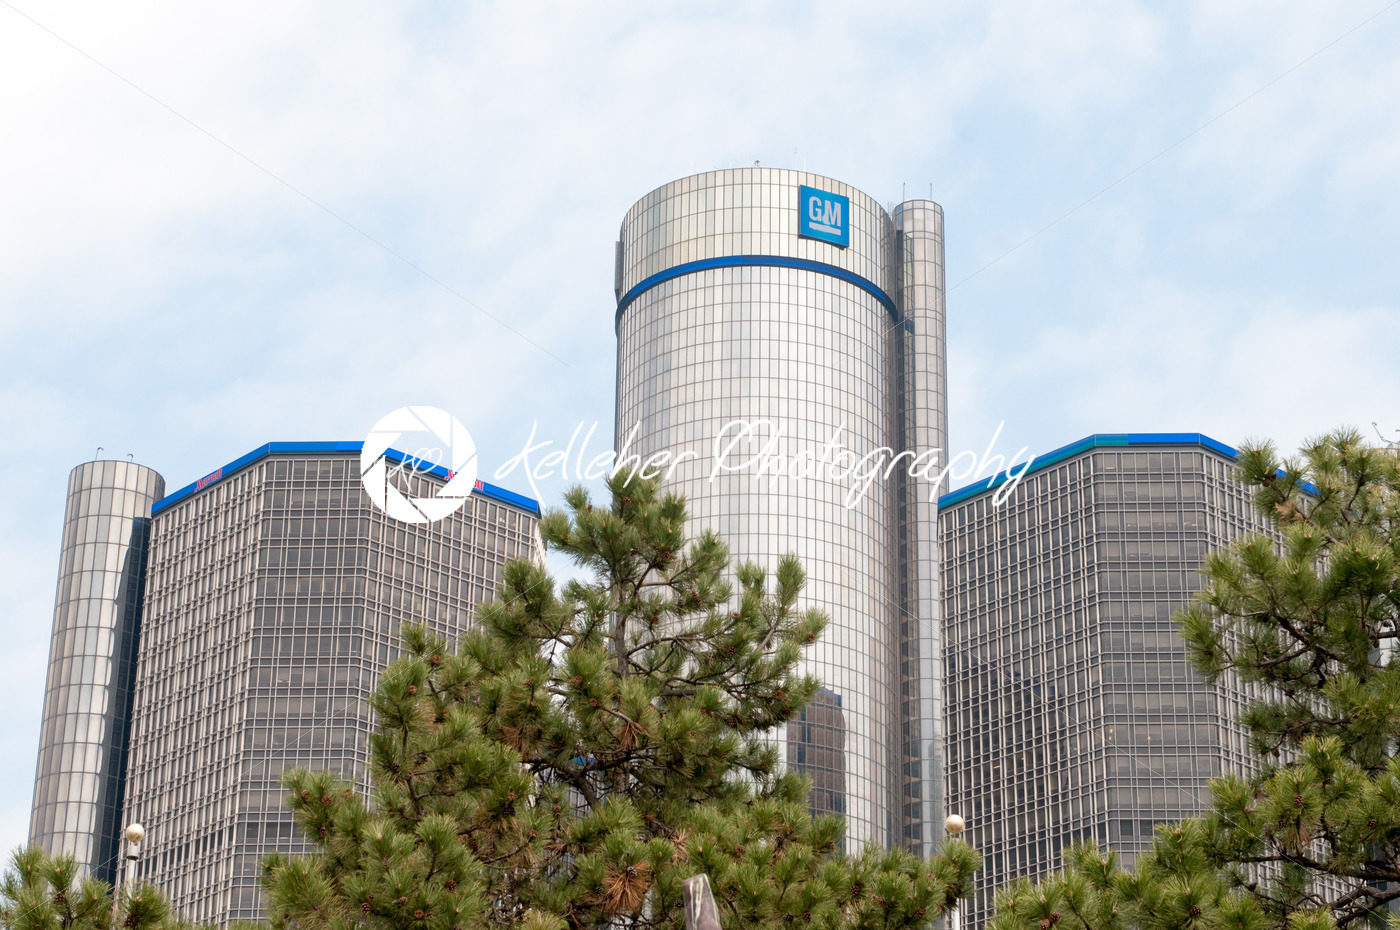 DETROIT, MI – MAY 8: General Motors World Headquarters where the majority of GM operations are based in downtown Detroit on May 8, 2014 - Kelleher Photography Store